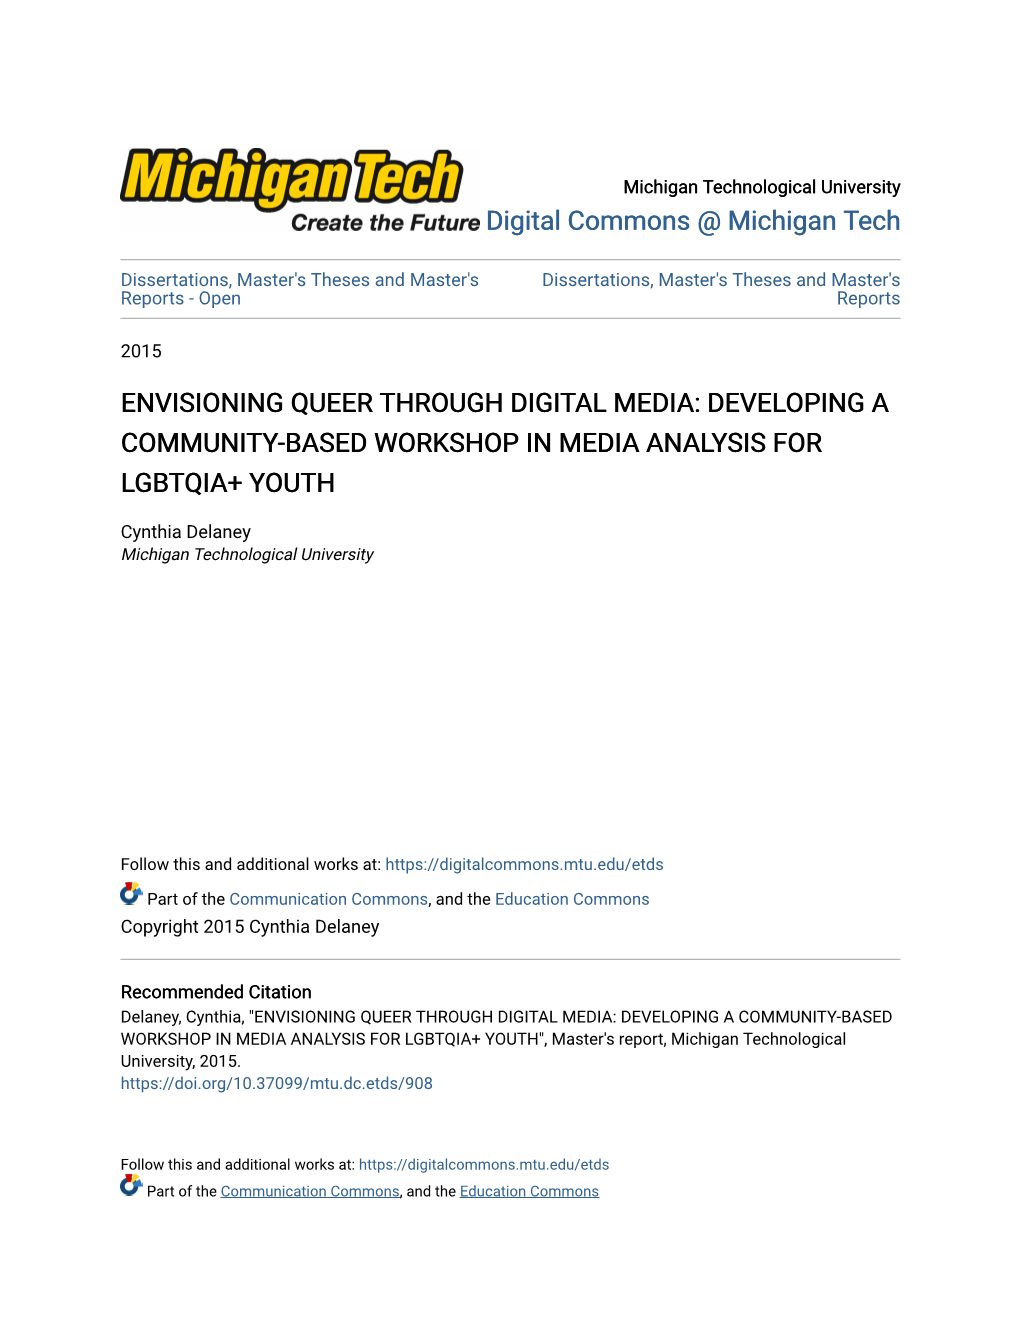 Envisioning Queer Through Digital Media: Developing a Community-Based Workshop in Media Analysis for Lgbtqia+ Youth